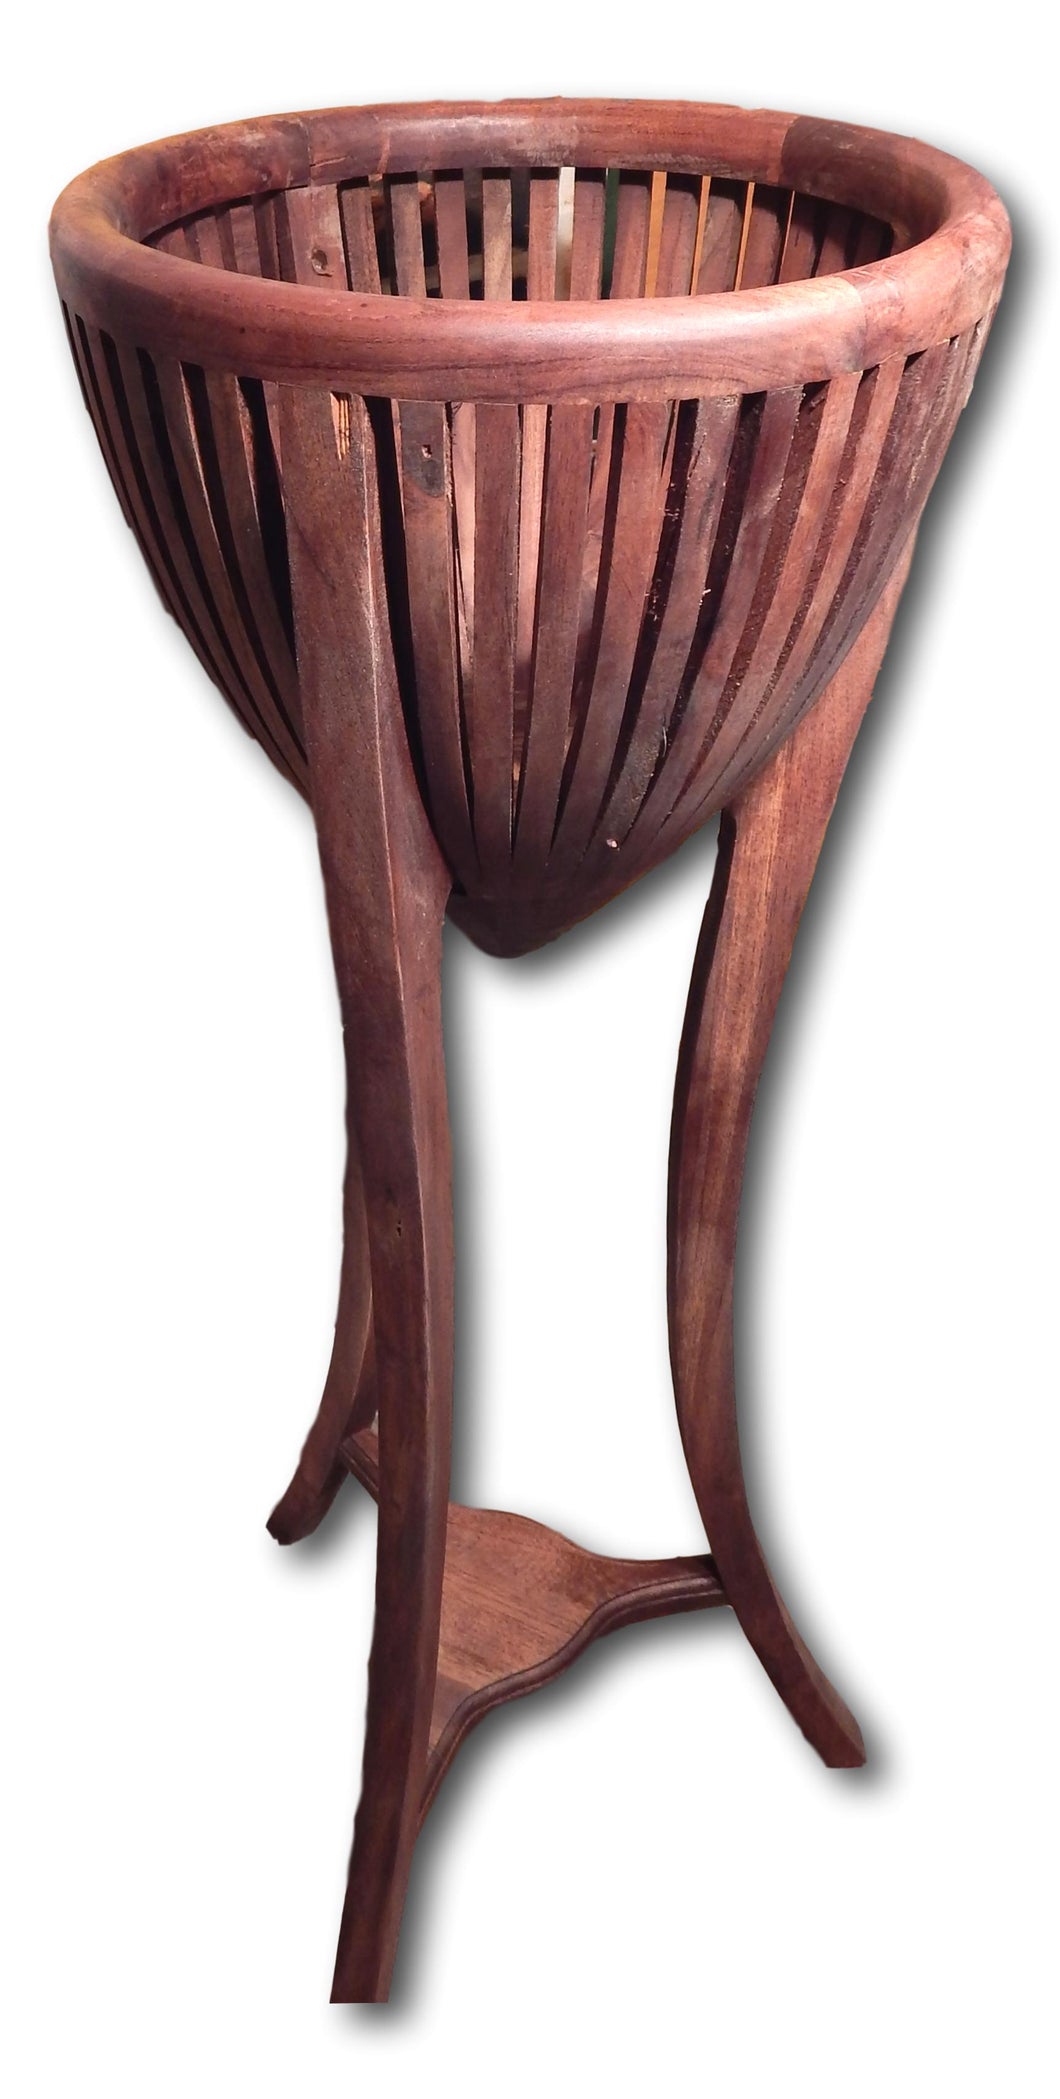 Plant holder handcrafted from Teak wood